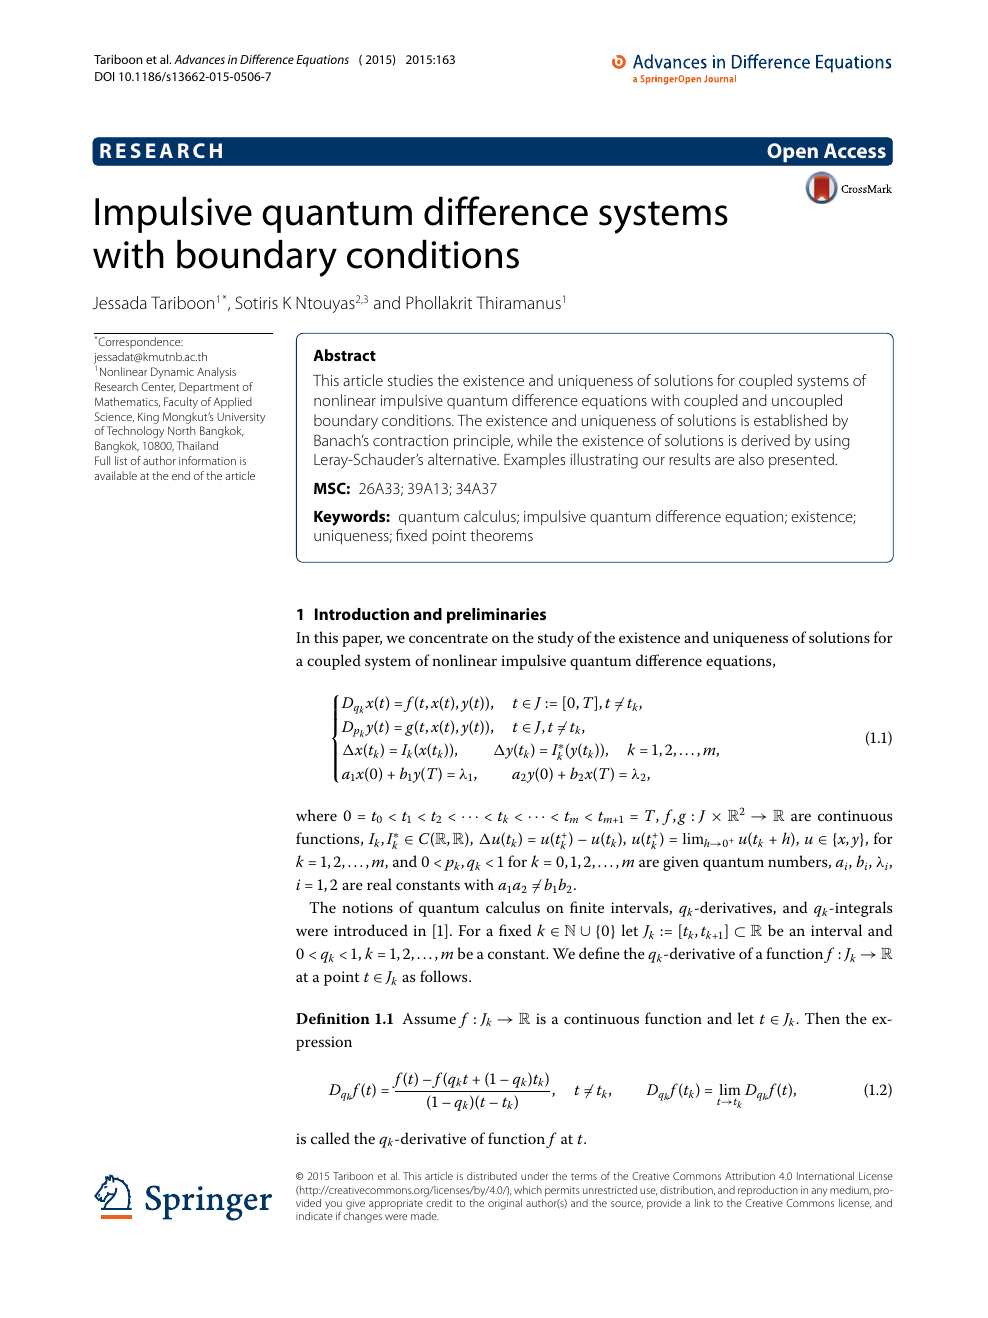 Impulsive Quantum Difference Systems With Boundary Conditions Topic Of Research Paper In Mathematics Download Scholarly Article Pdf And Read For Free On Cyberleninka Open Science Hub